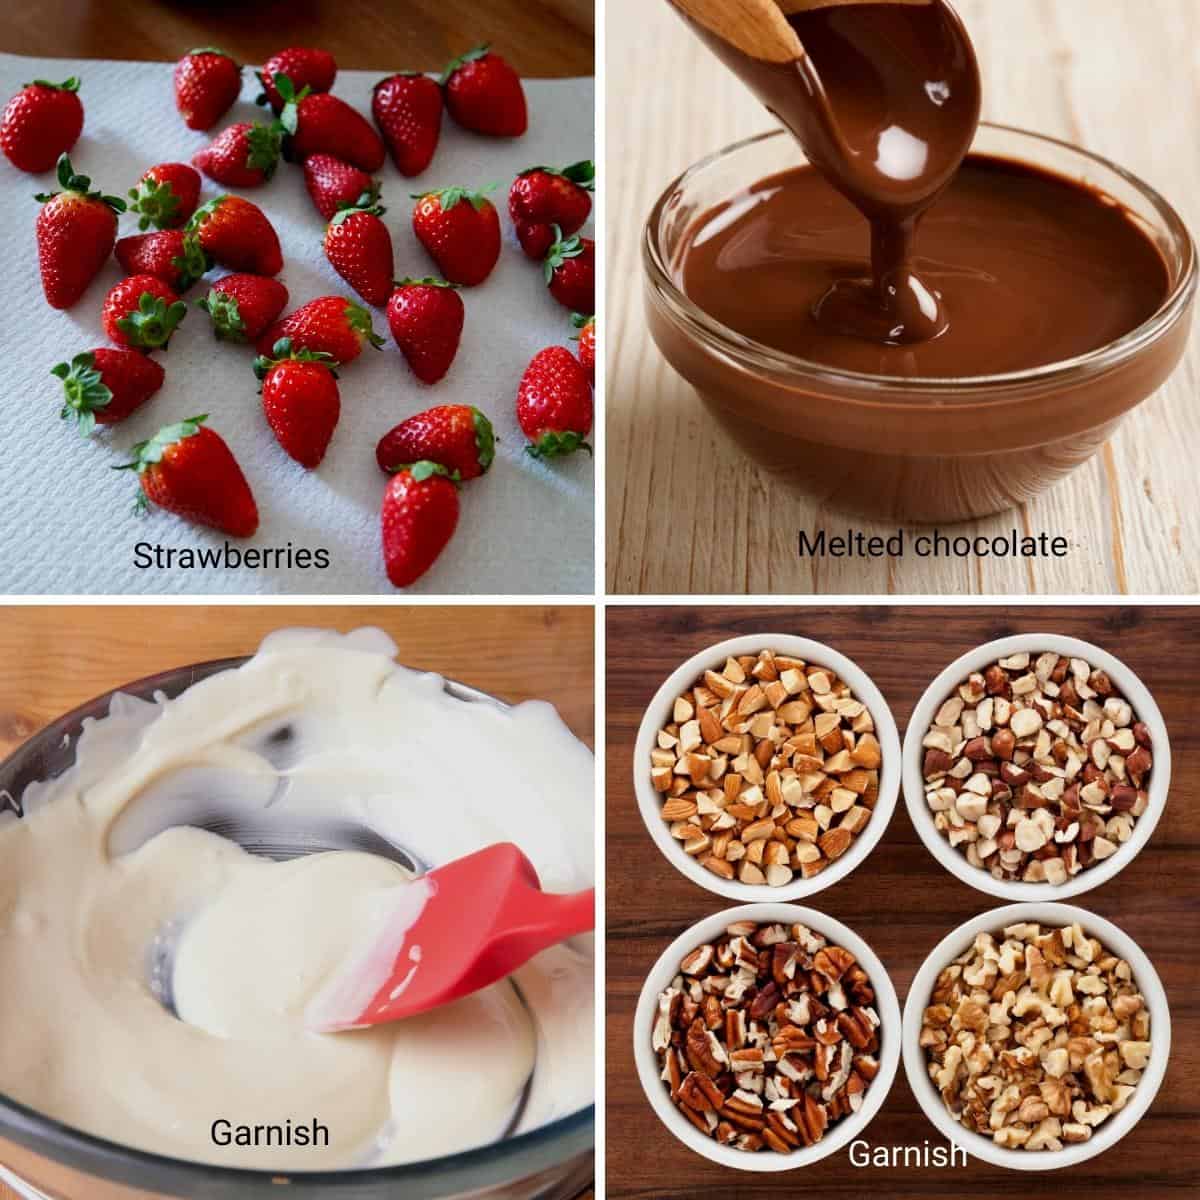 Ingredients for making chocolate covered strawberries.